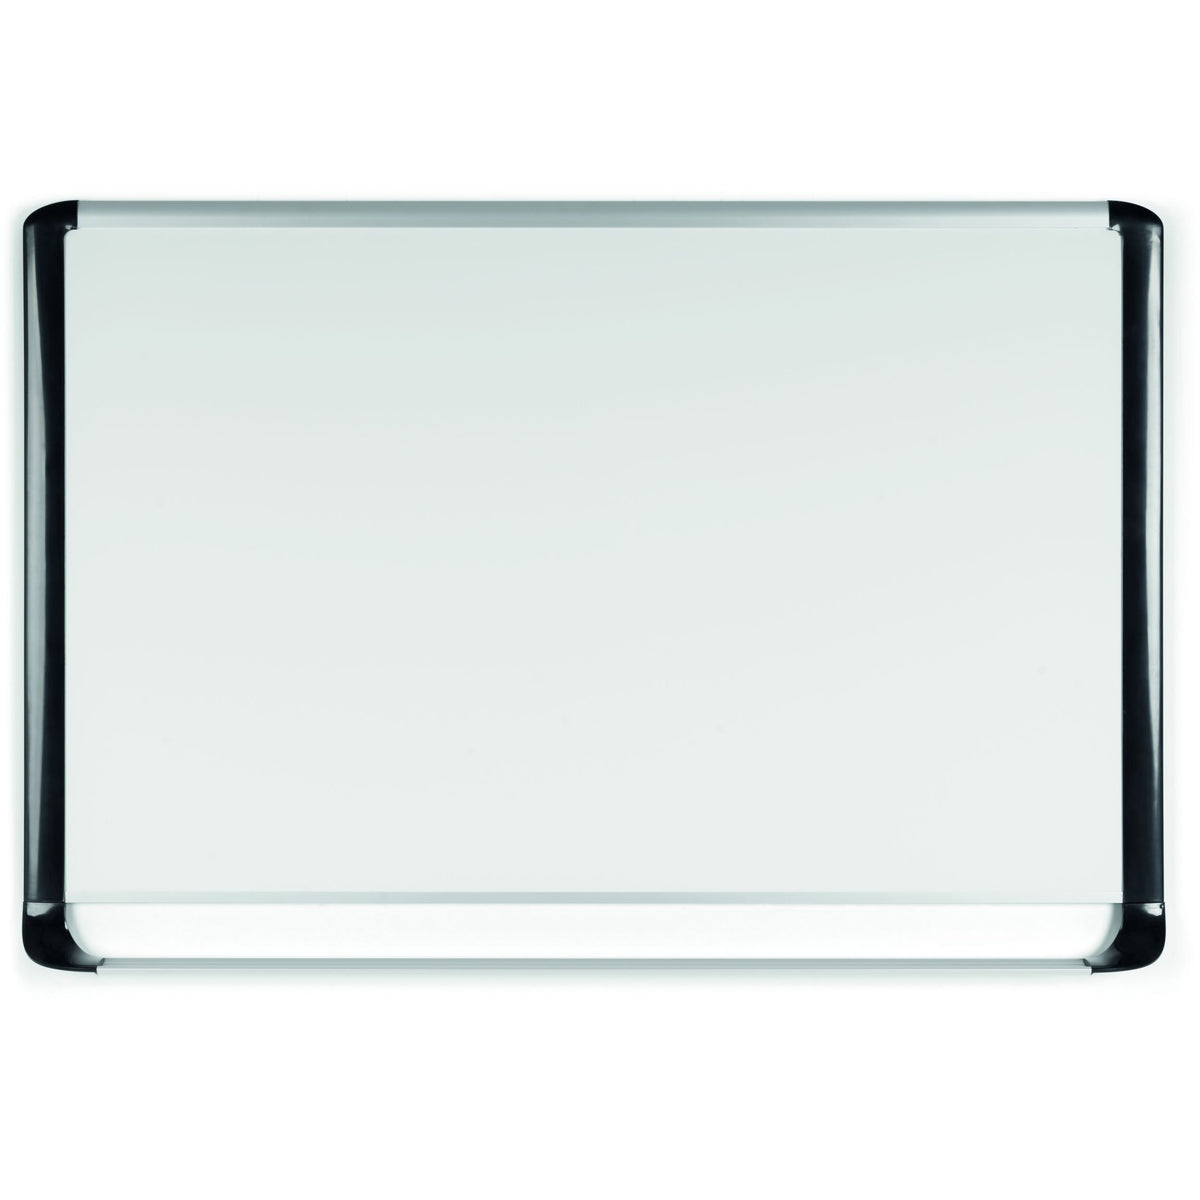 MVI210401 MVI Series Magnetic Porcelain Dry Erase Board, Easy Clean, Scratch Resistant Wall Mounting Whiteboard, 48" x 96", Black Frame by MasterVision